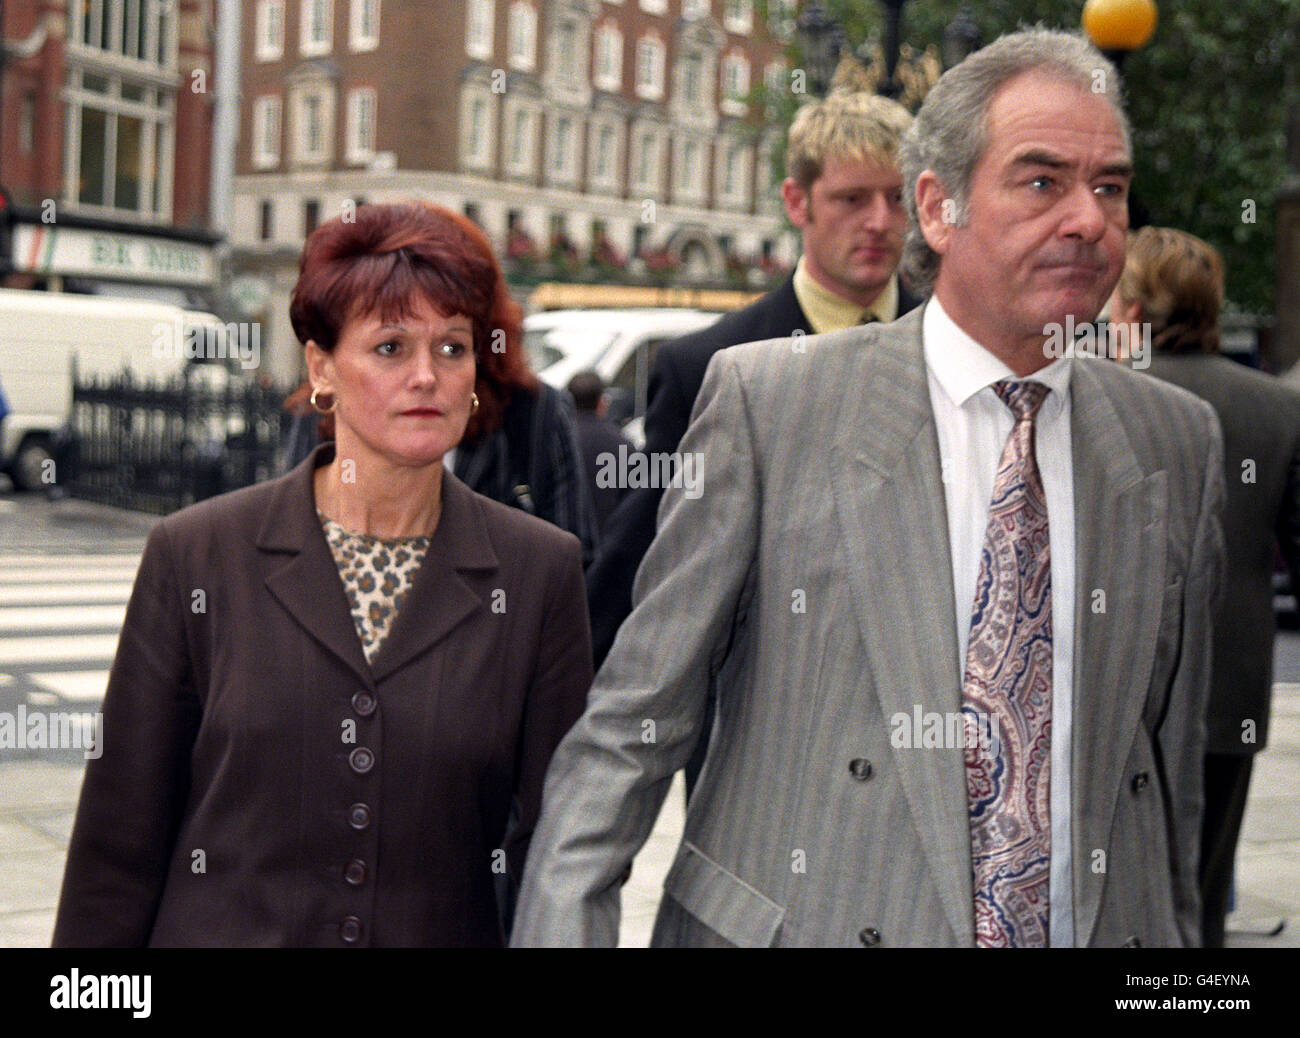 The parents of murdered Lee Harvey, Maureen and Ray Harvey arrived at The High Court in London today (Monday) to hear Tracie Andrews' appeal against her July 1997 conviction. Tracie Andrews, jailed for life for murdering the fiance she claimed was killed by a mystery motorist in a road rage attack, will have to wait to see if her Court of Appeal bid for freedom will succeed. See PA story COURTS Andrews. Photo by Rosie Hallam/PA. Stock Photo